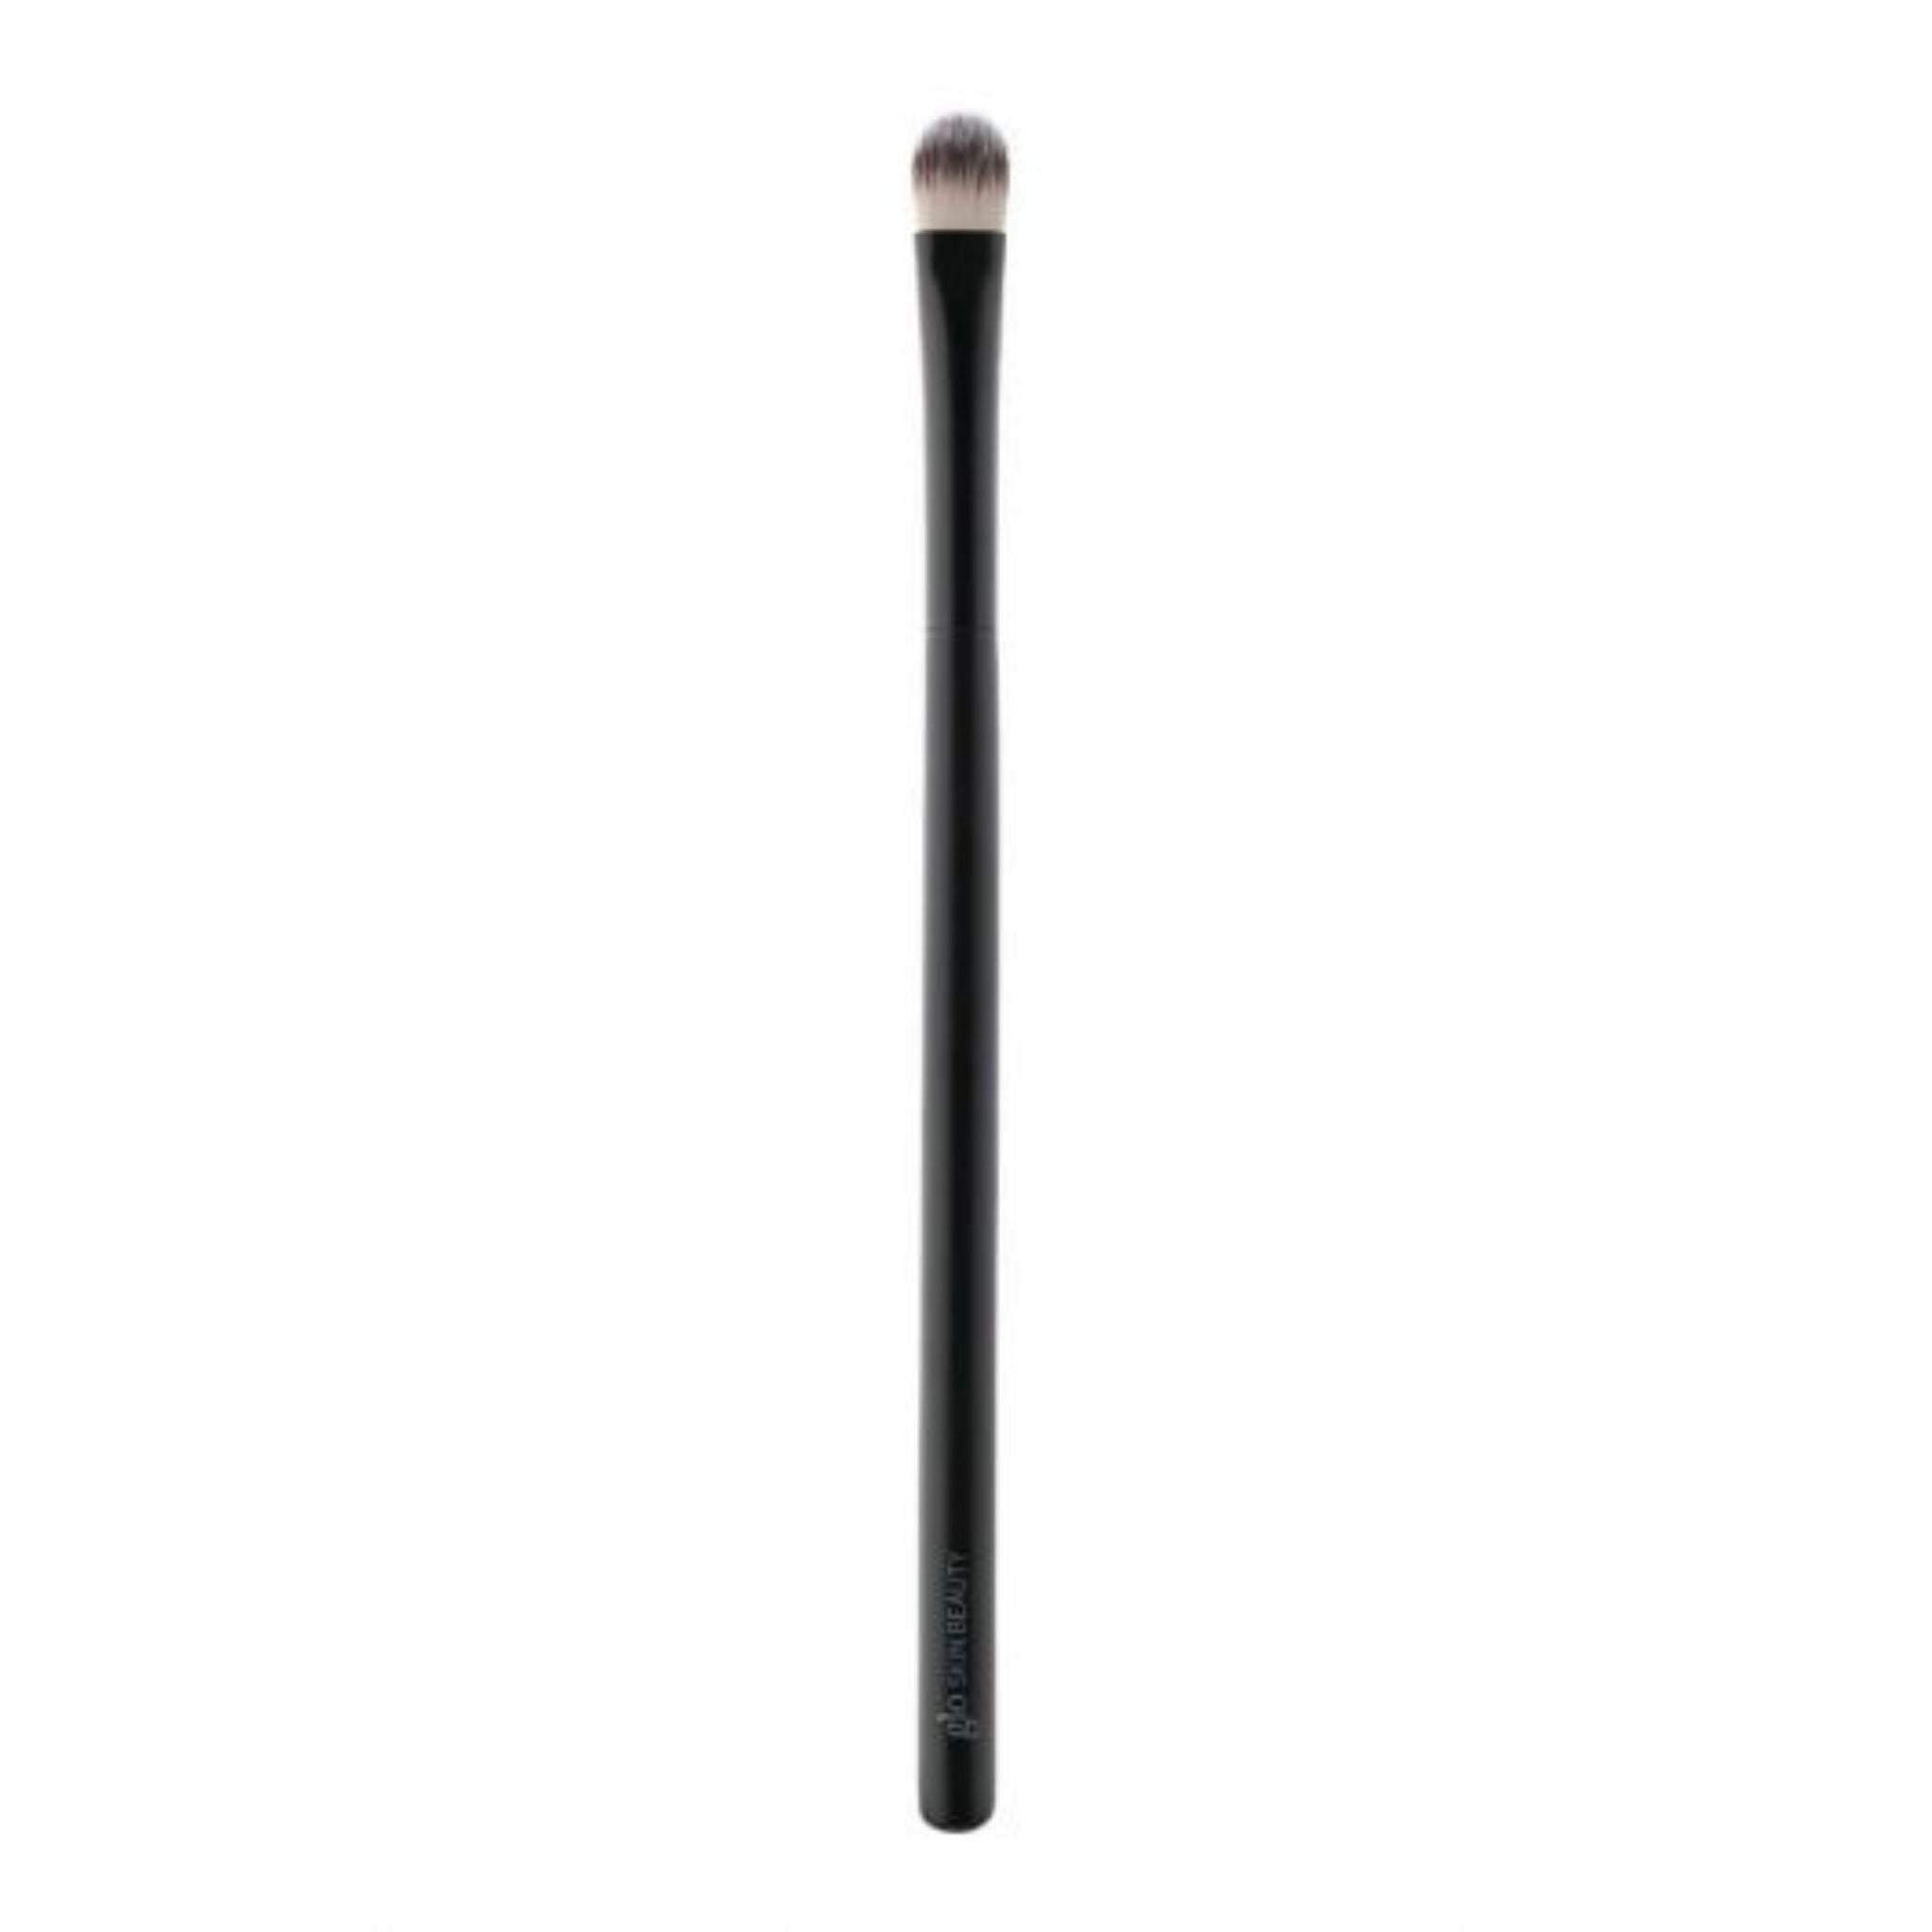 Glo Skin Beauty - 110 Camouflage Concealer Brush